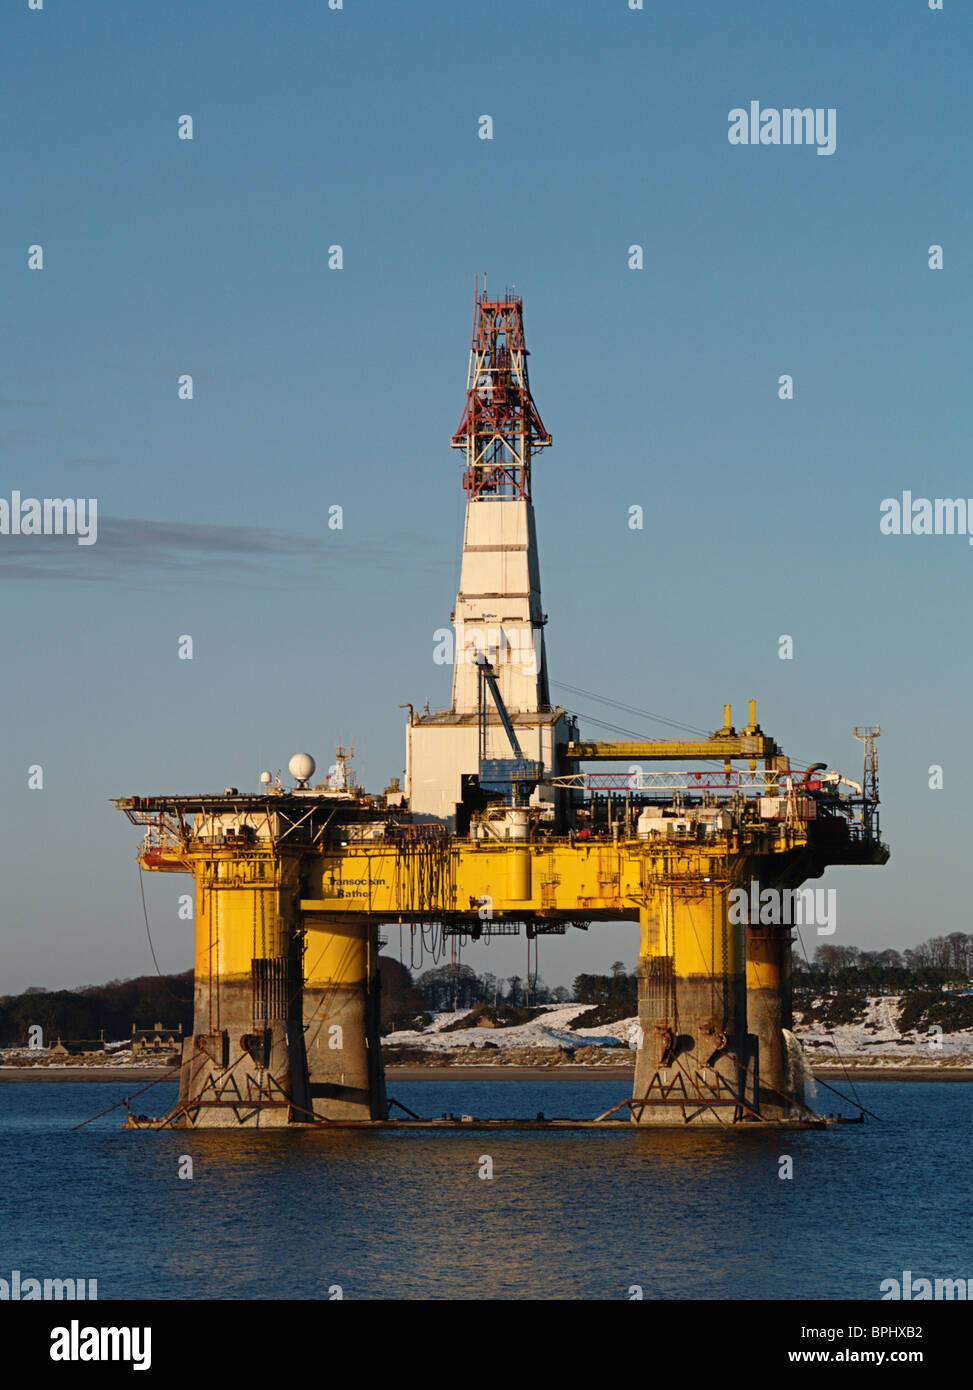 The semi-submersible oil rig the Transocean Rather in the Cromarty Firth Scotland. Stock Photo